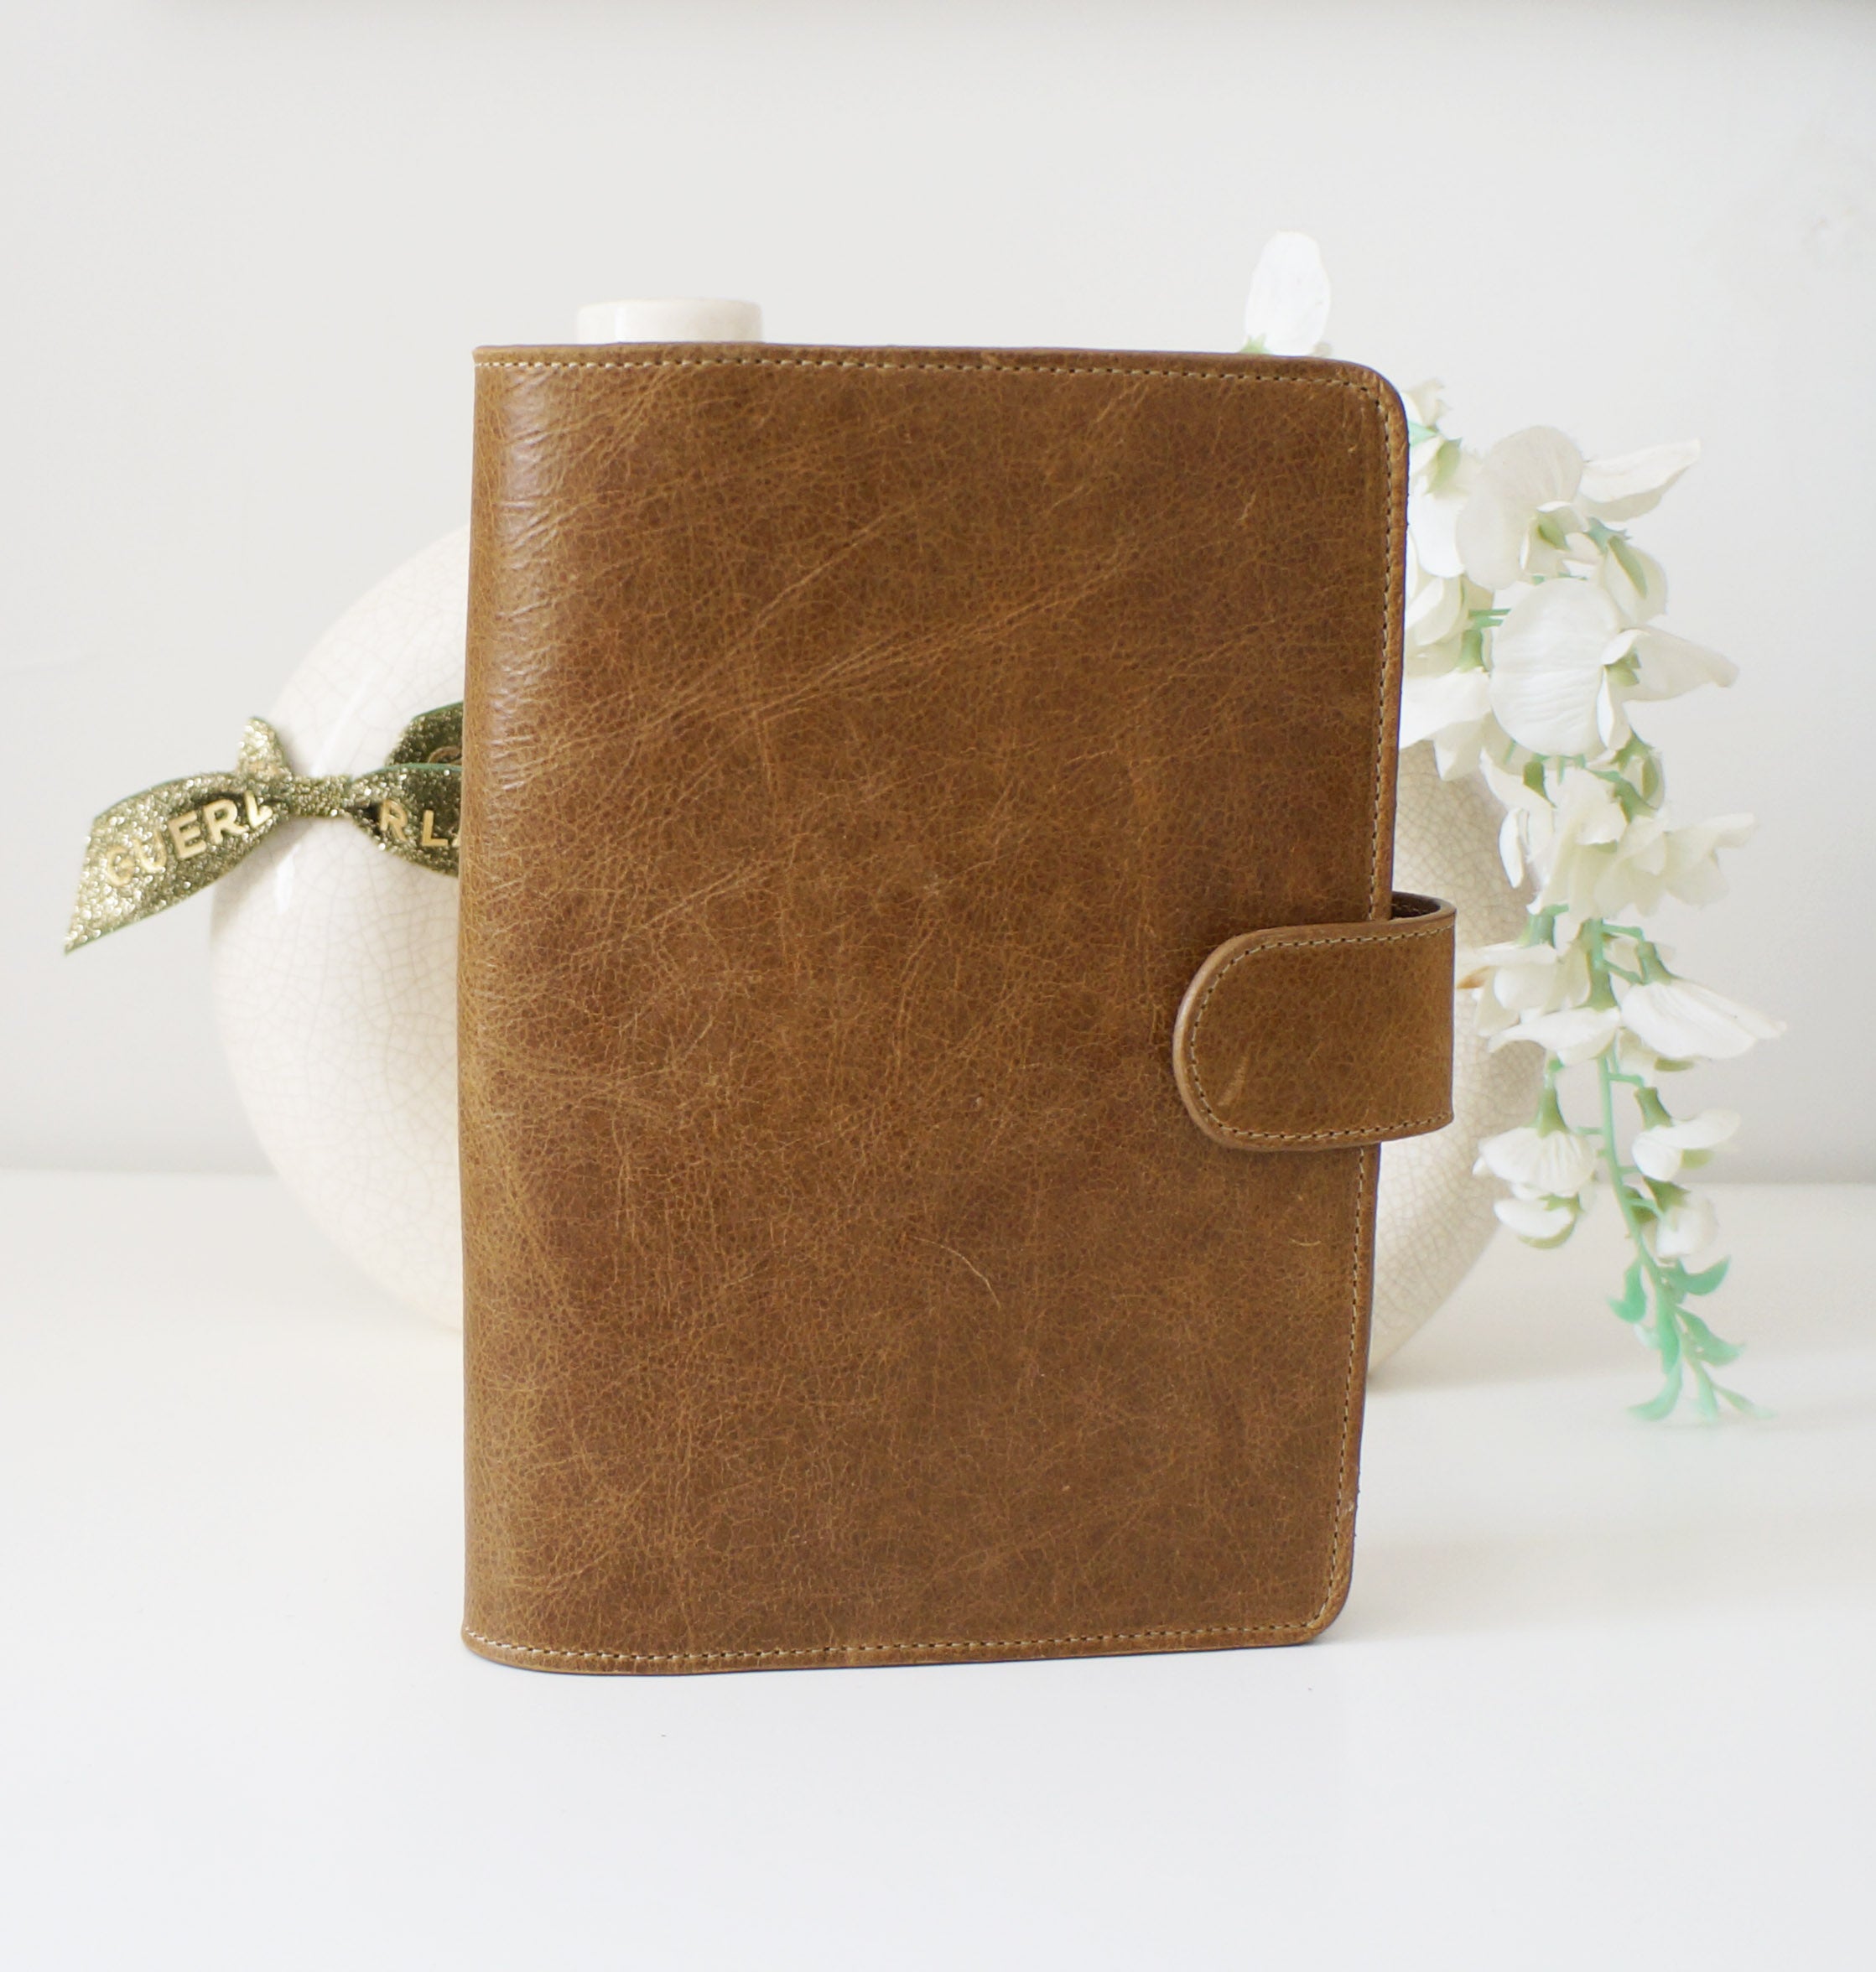 A5 Journal Cover - Almond